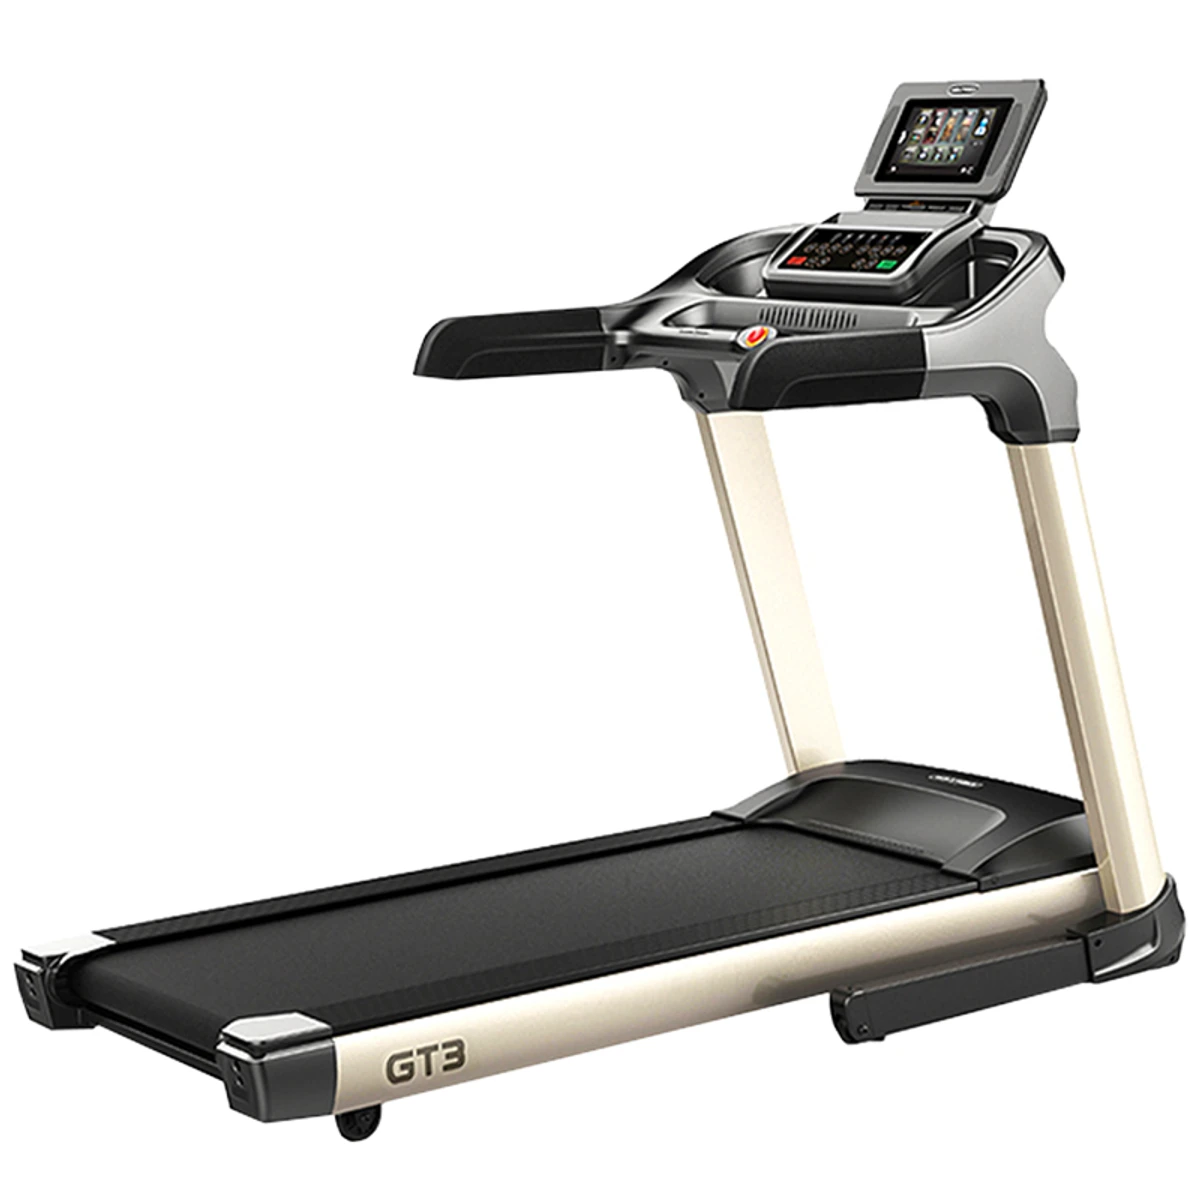 GT3A Android Semi Commercial Motorized Treadmill